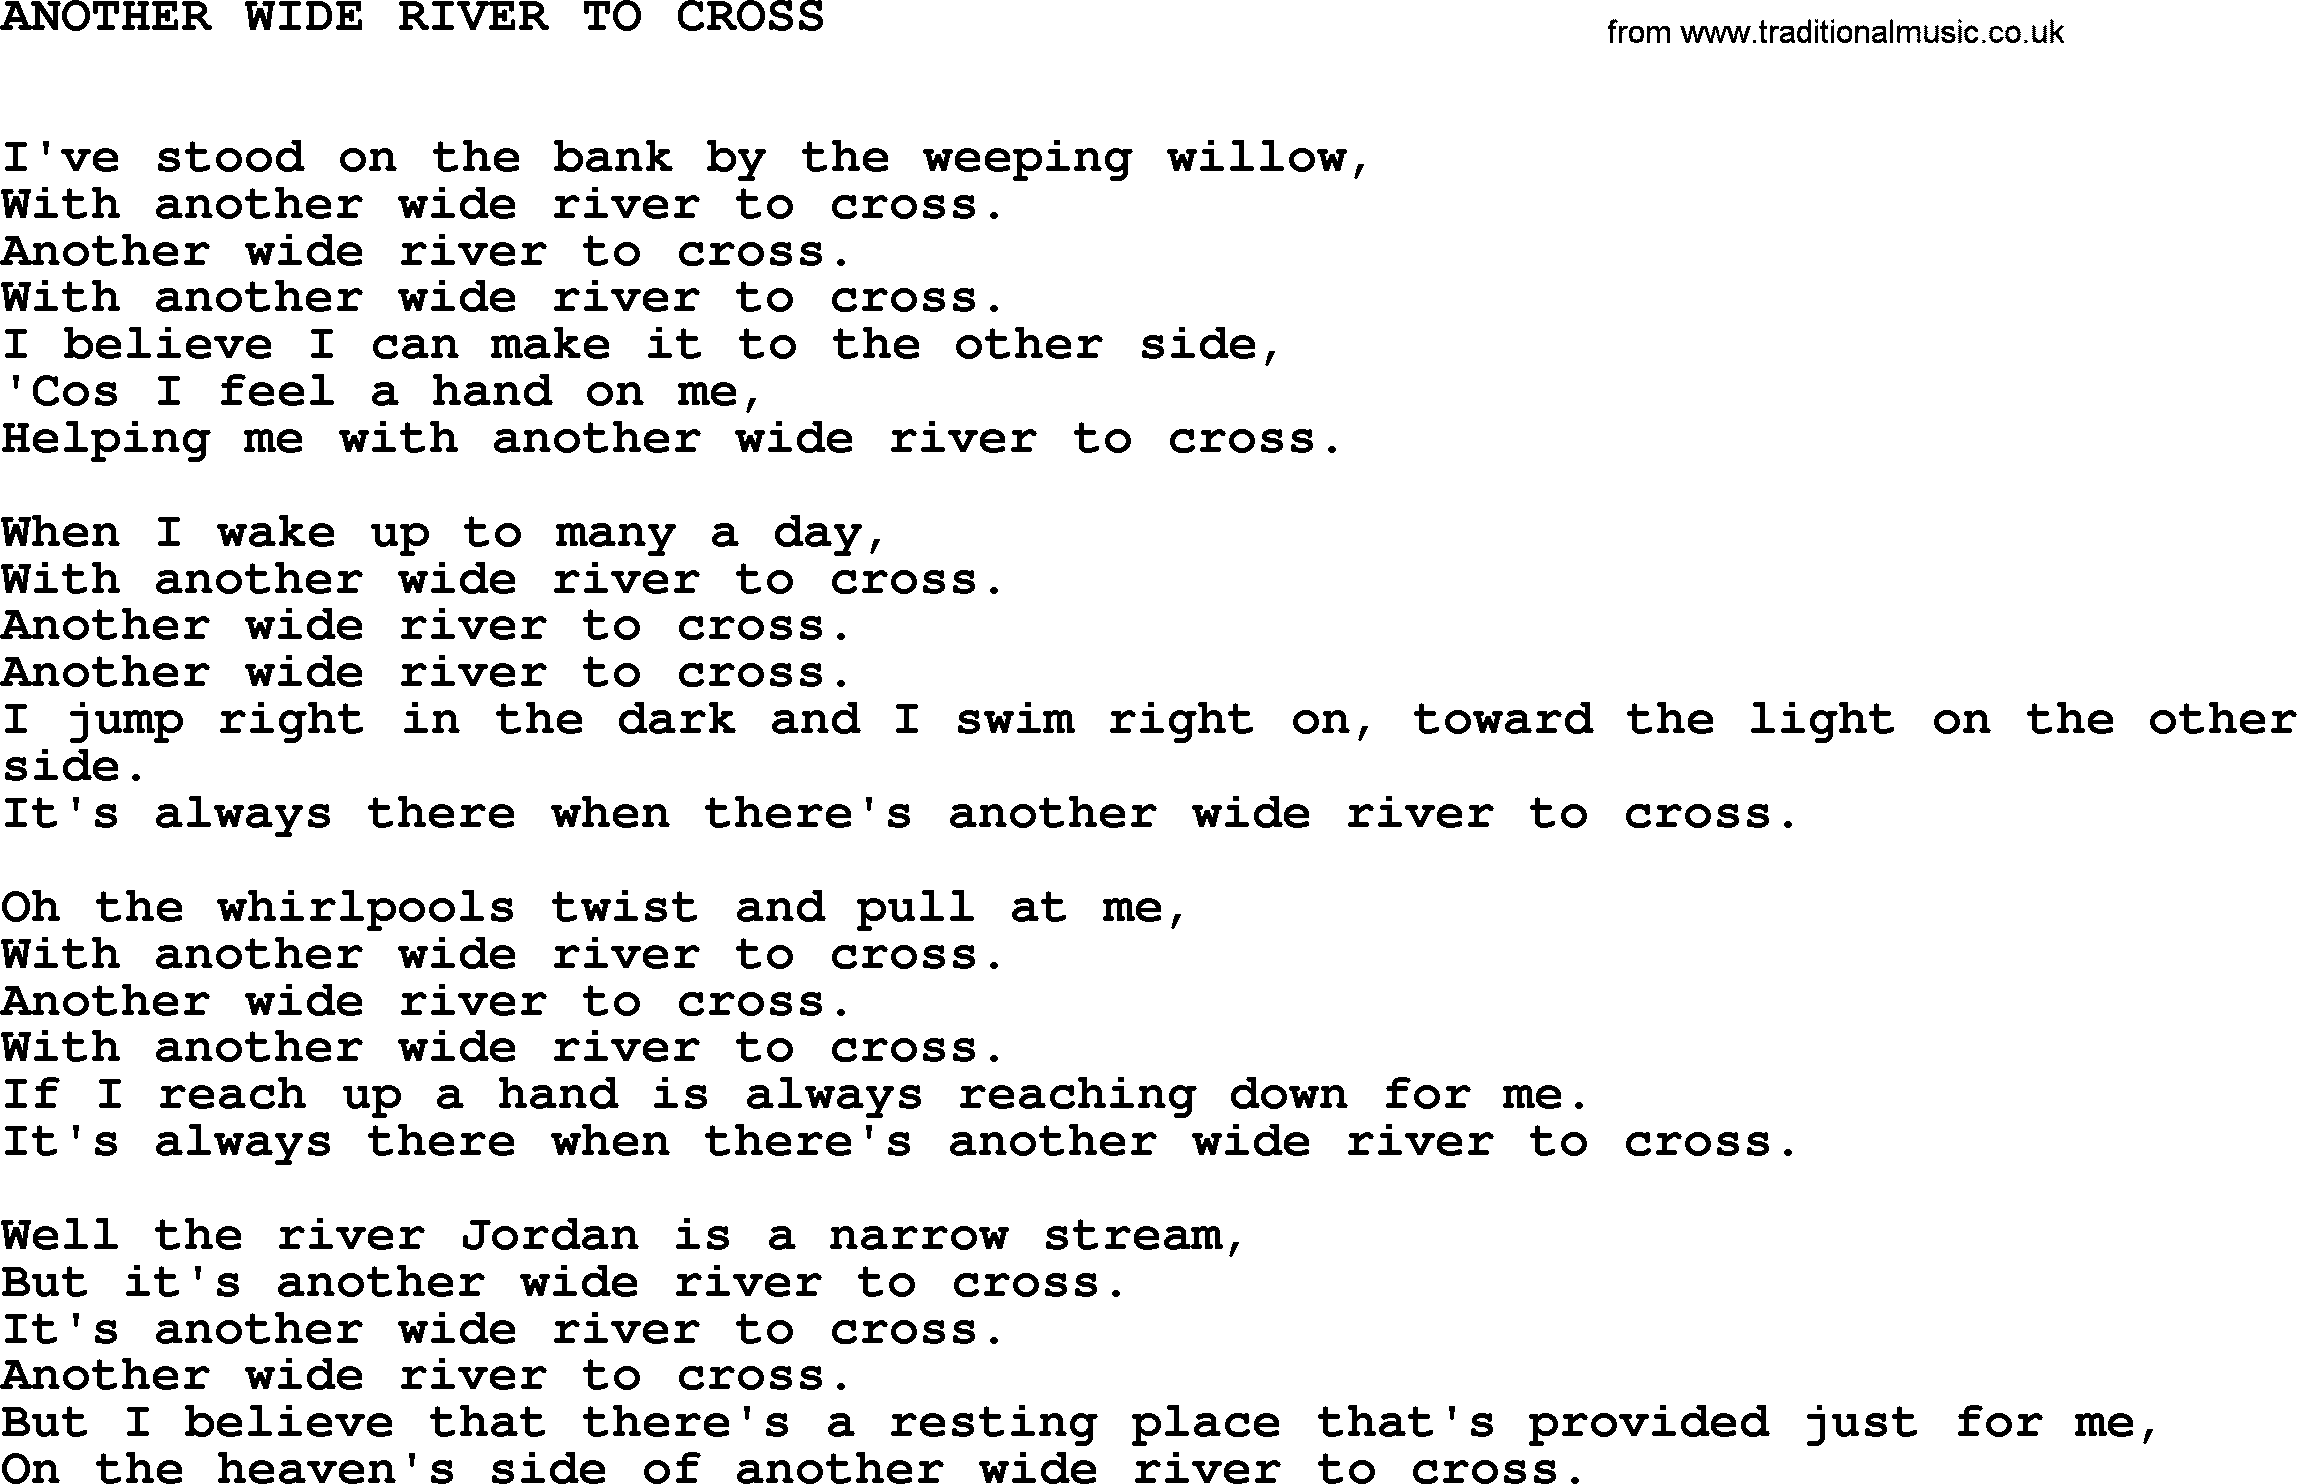 Johnny Cash song Another Wide River To Cross.txt lyrics